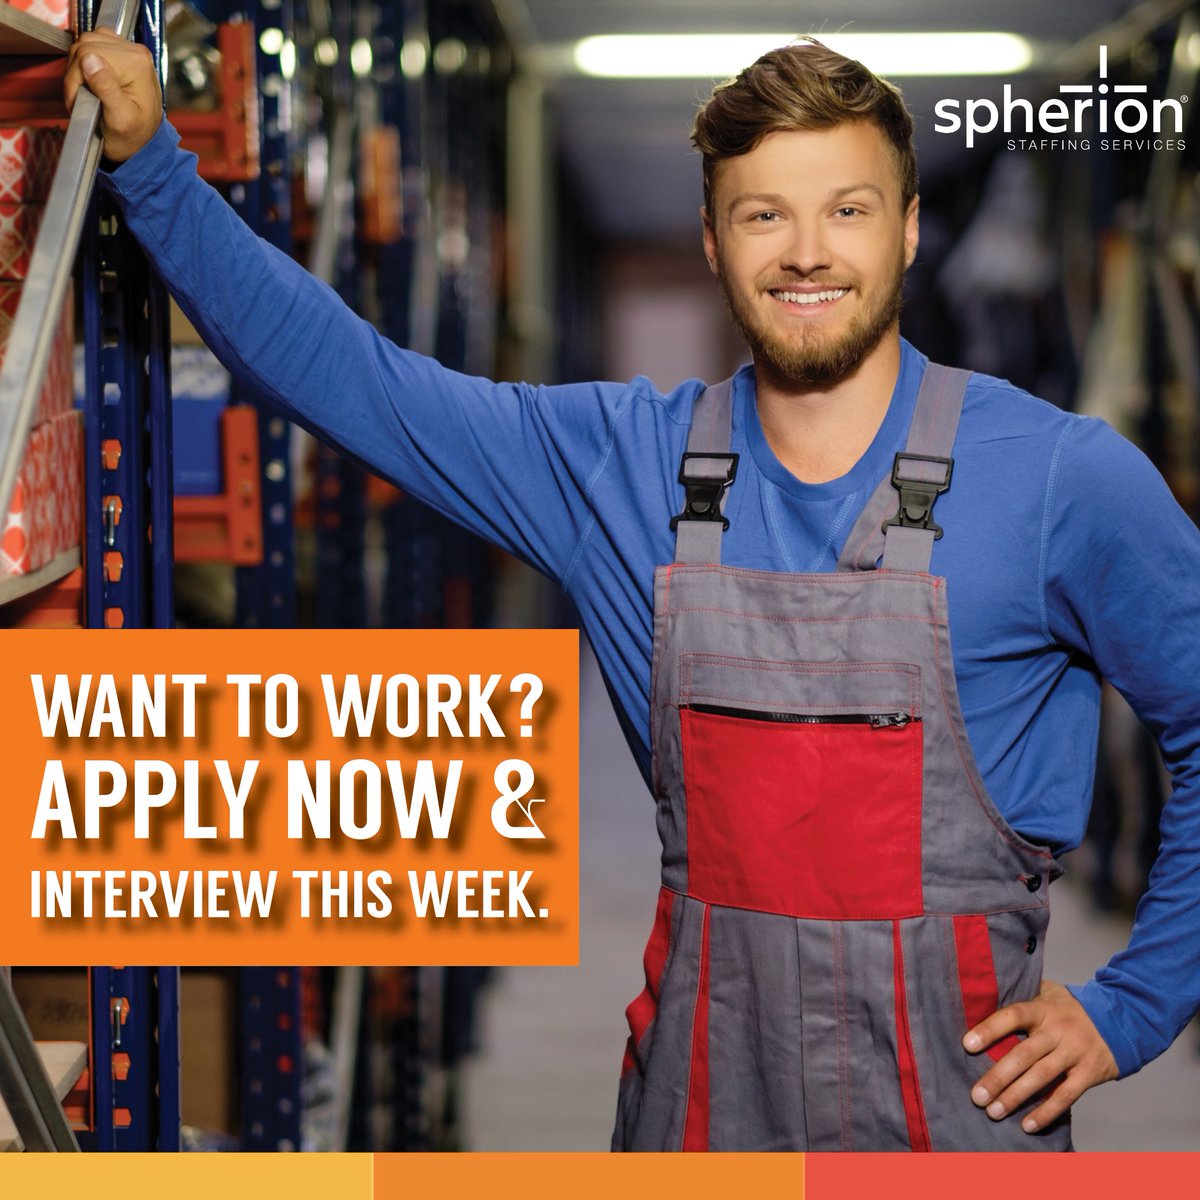 WANT TO WORK?! APPLY NOW & INTERVIEW WITH OUR TEAM. SIGN UP for Open Hours Interview hours: bit.ly/2OcDPb9  #newjob #jobfair #jobinterivew #workwithspherion
OPEN INTERVIEWS: 
THURSDAY ONLY THIS WEEK
October 4th | 10am - 12pm 
📍1925 E Edgewood Dr #102 
📞(863) 667- 0800